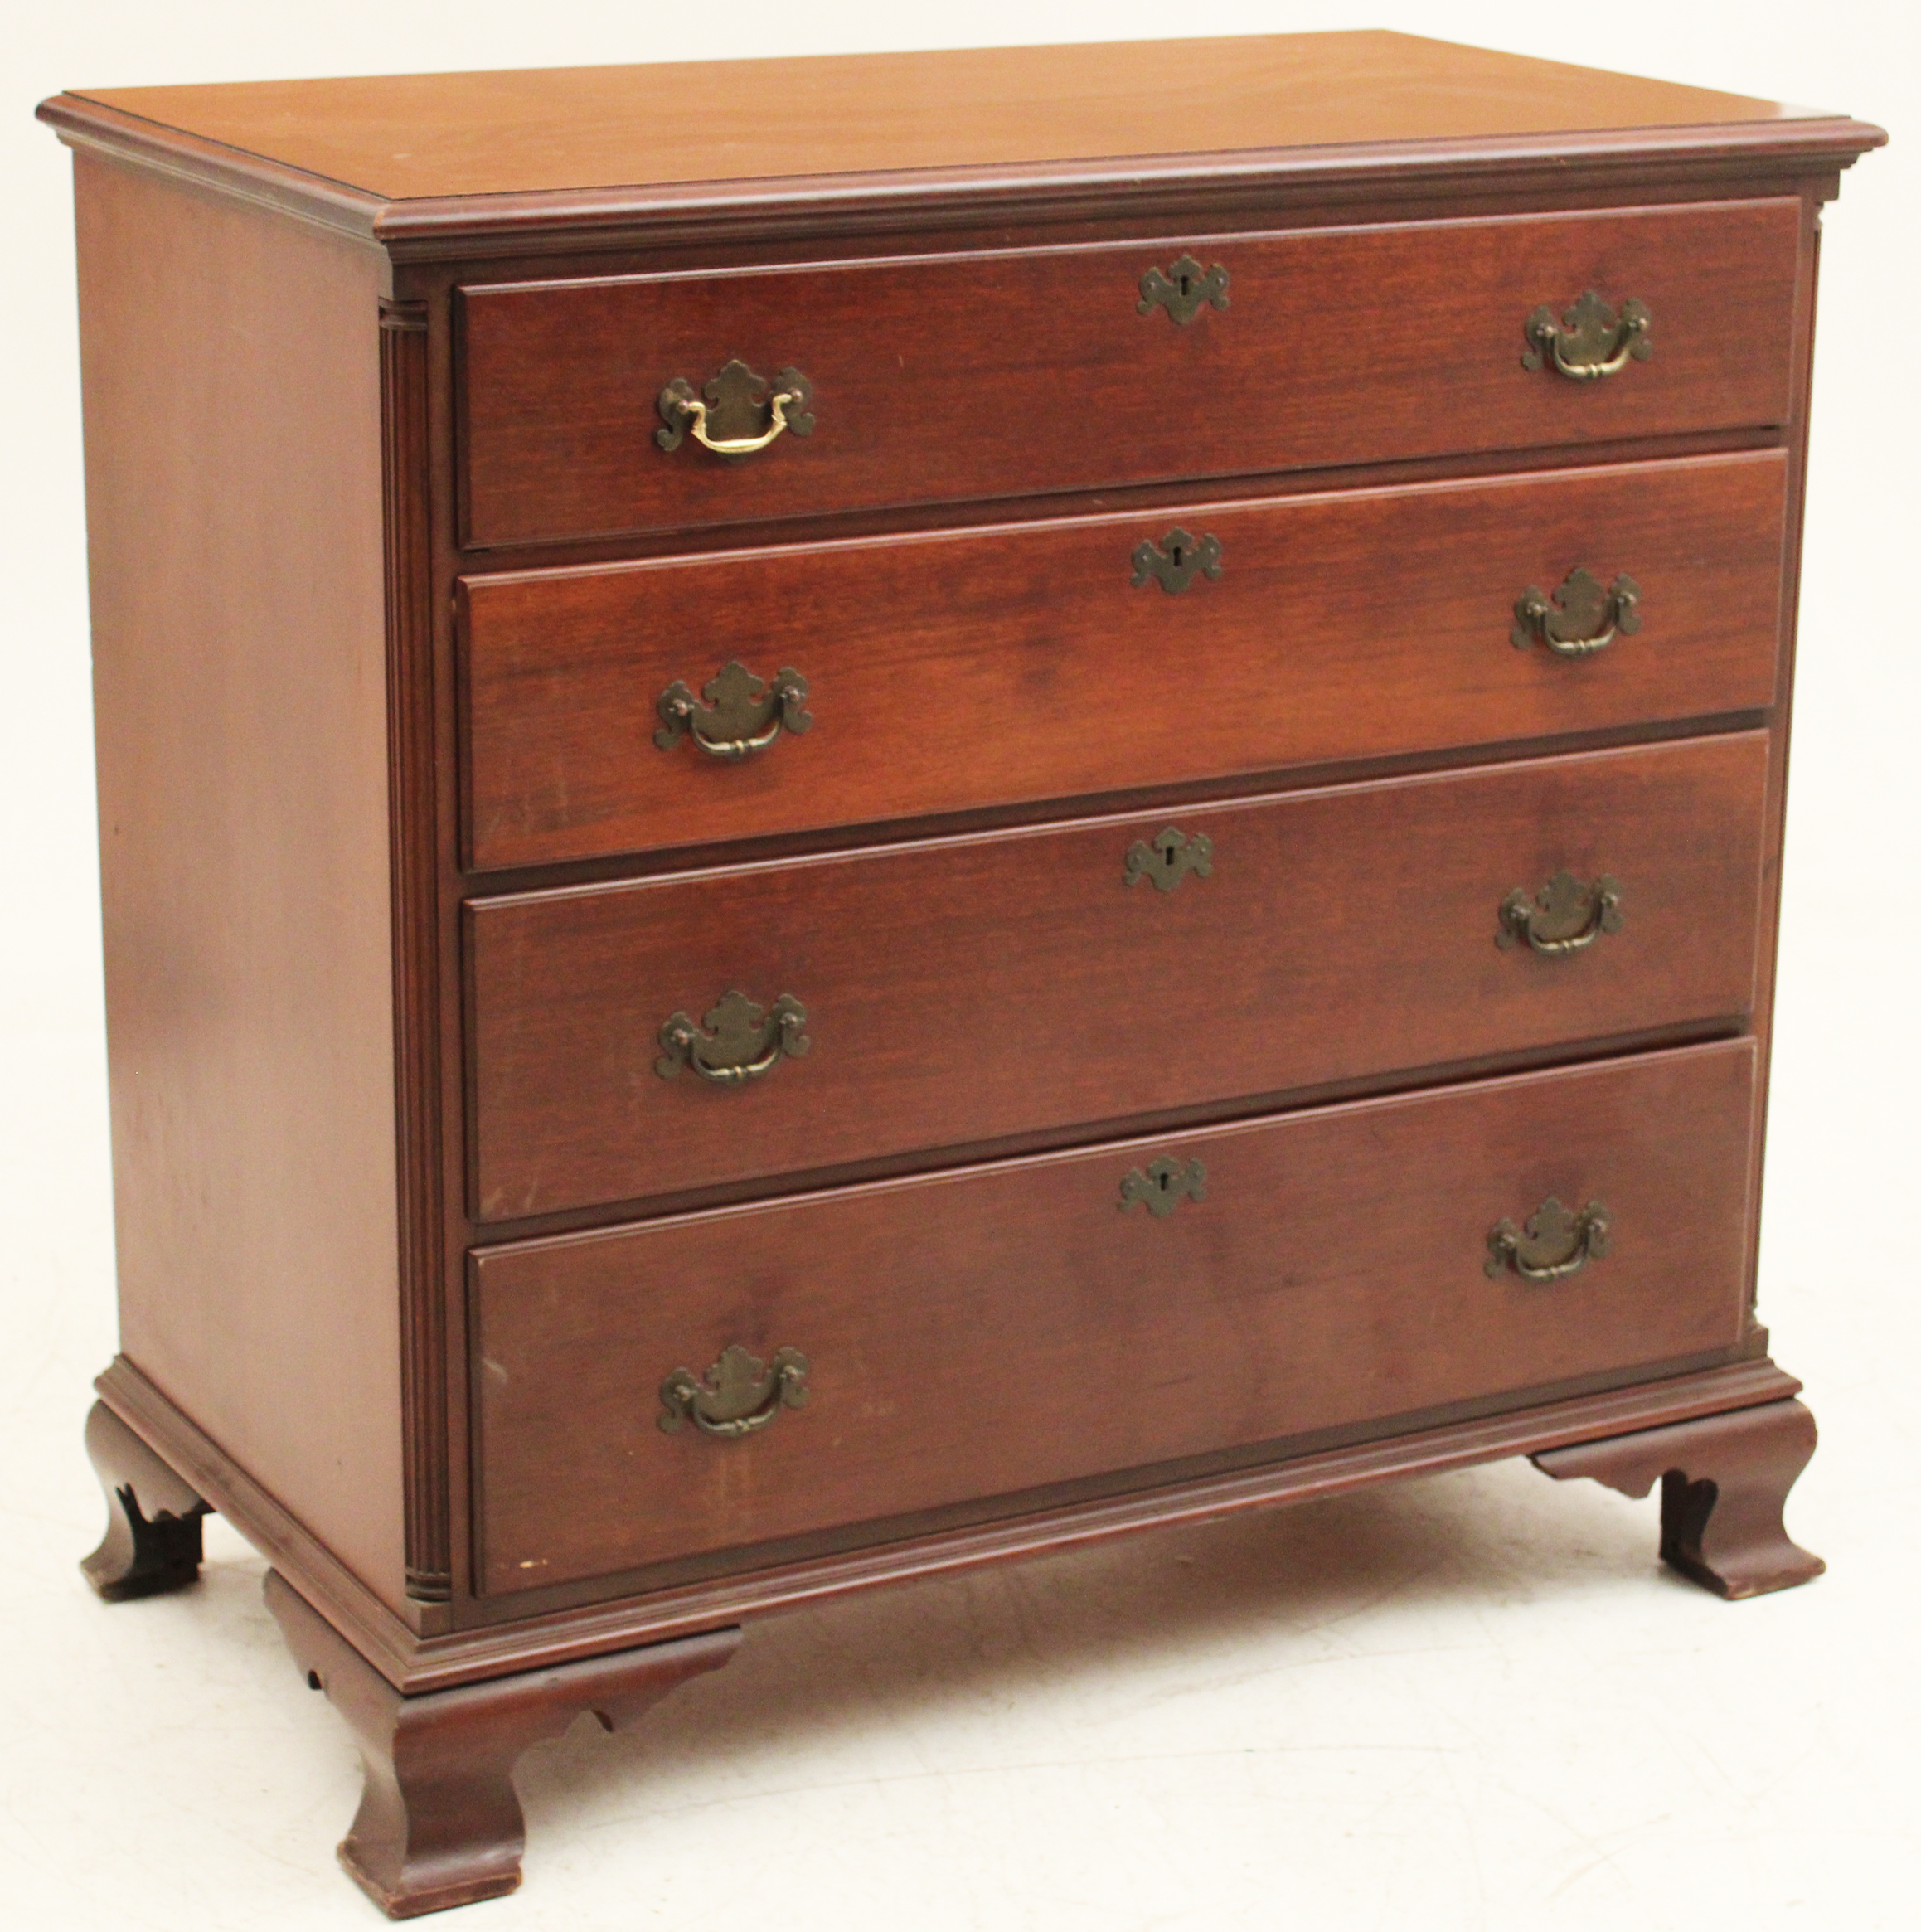 AMERICAN STYLE 4 DRAWER CHEST AMERICAN 35f05e